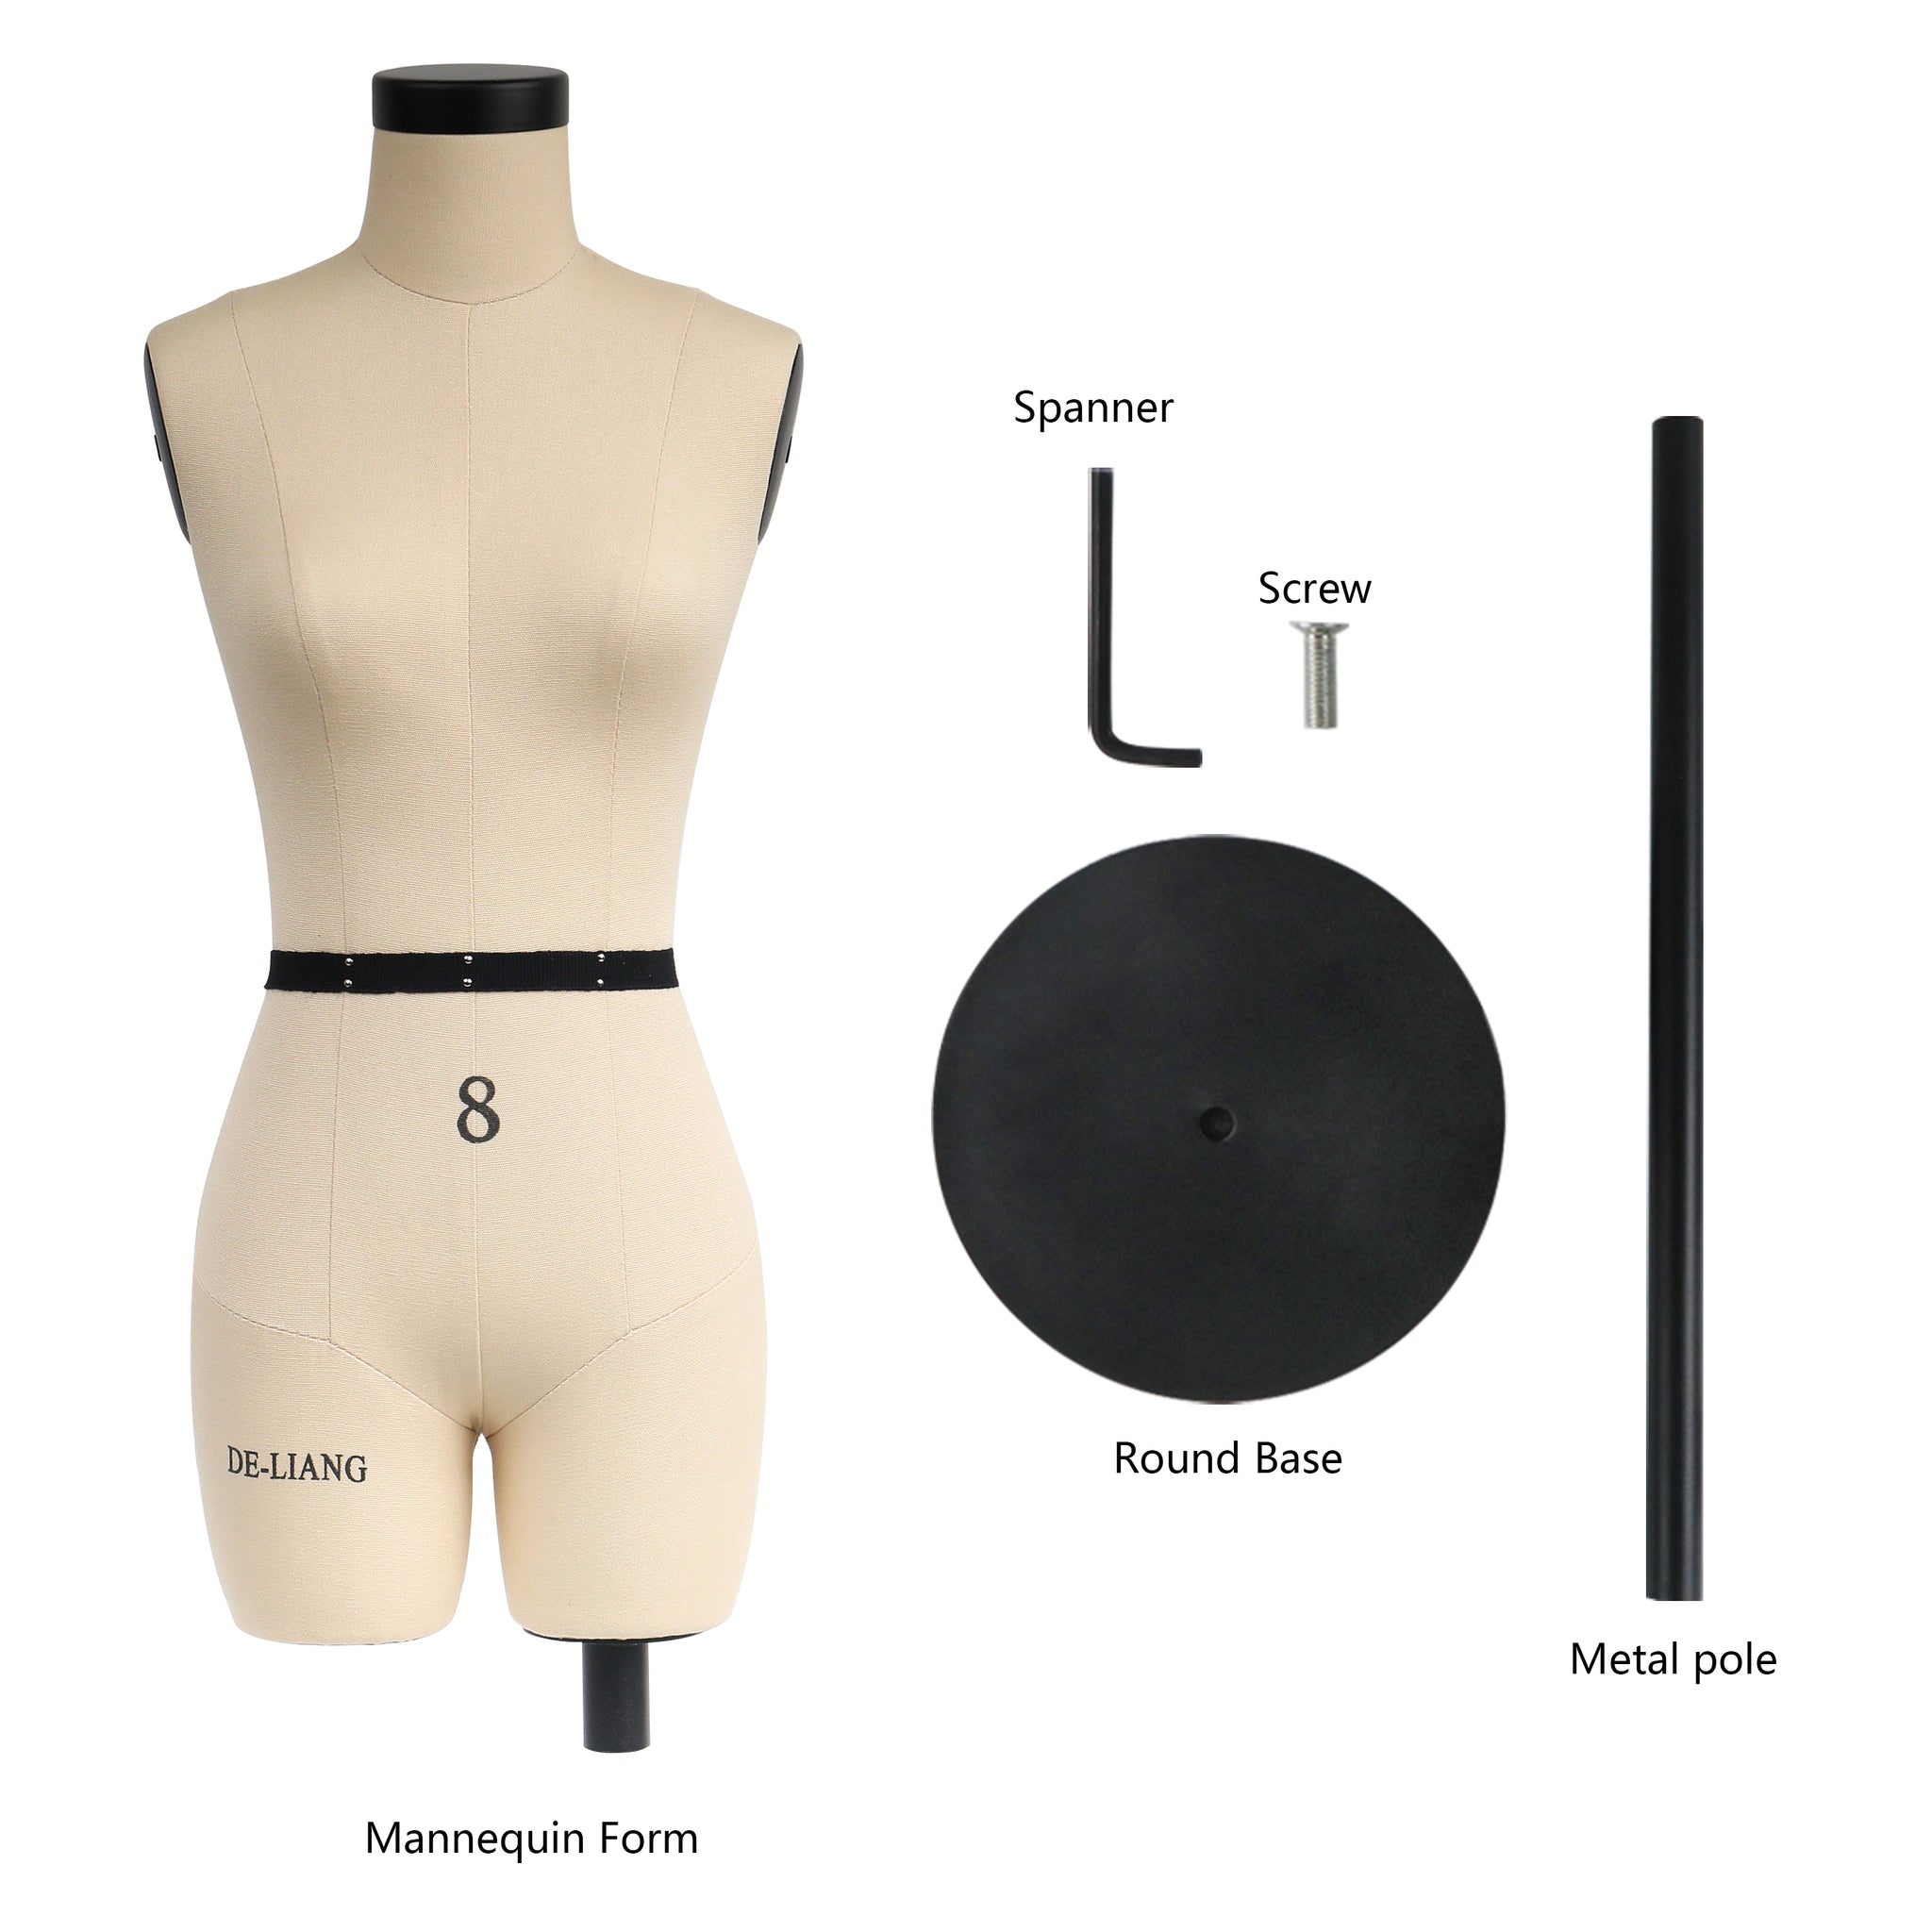 Buy Dressmaker's Dummies, Tailors mannequin and Adjustable Dress Forms -  Sewing Online